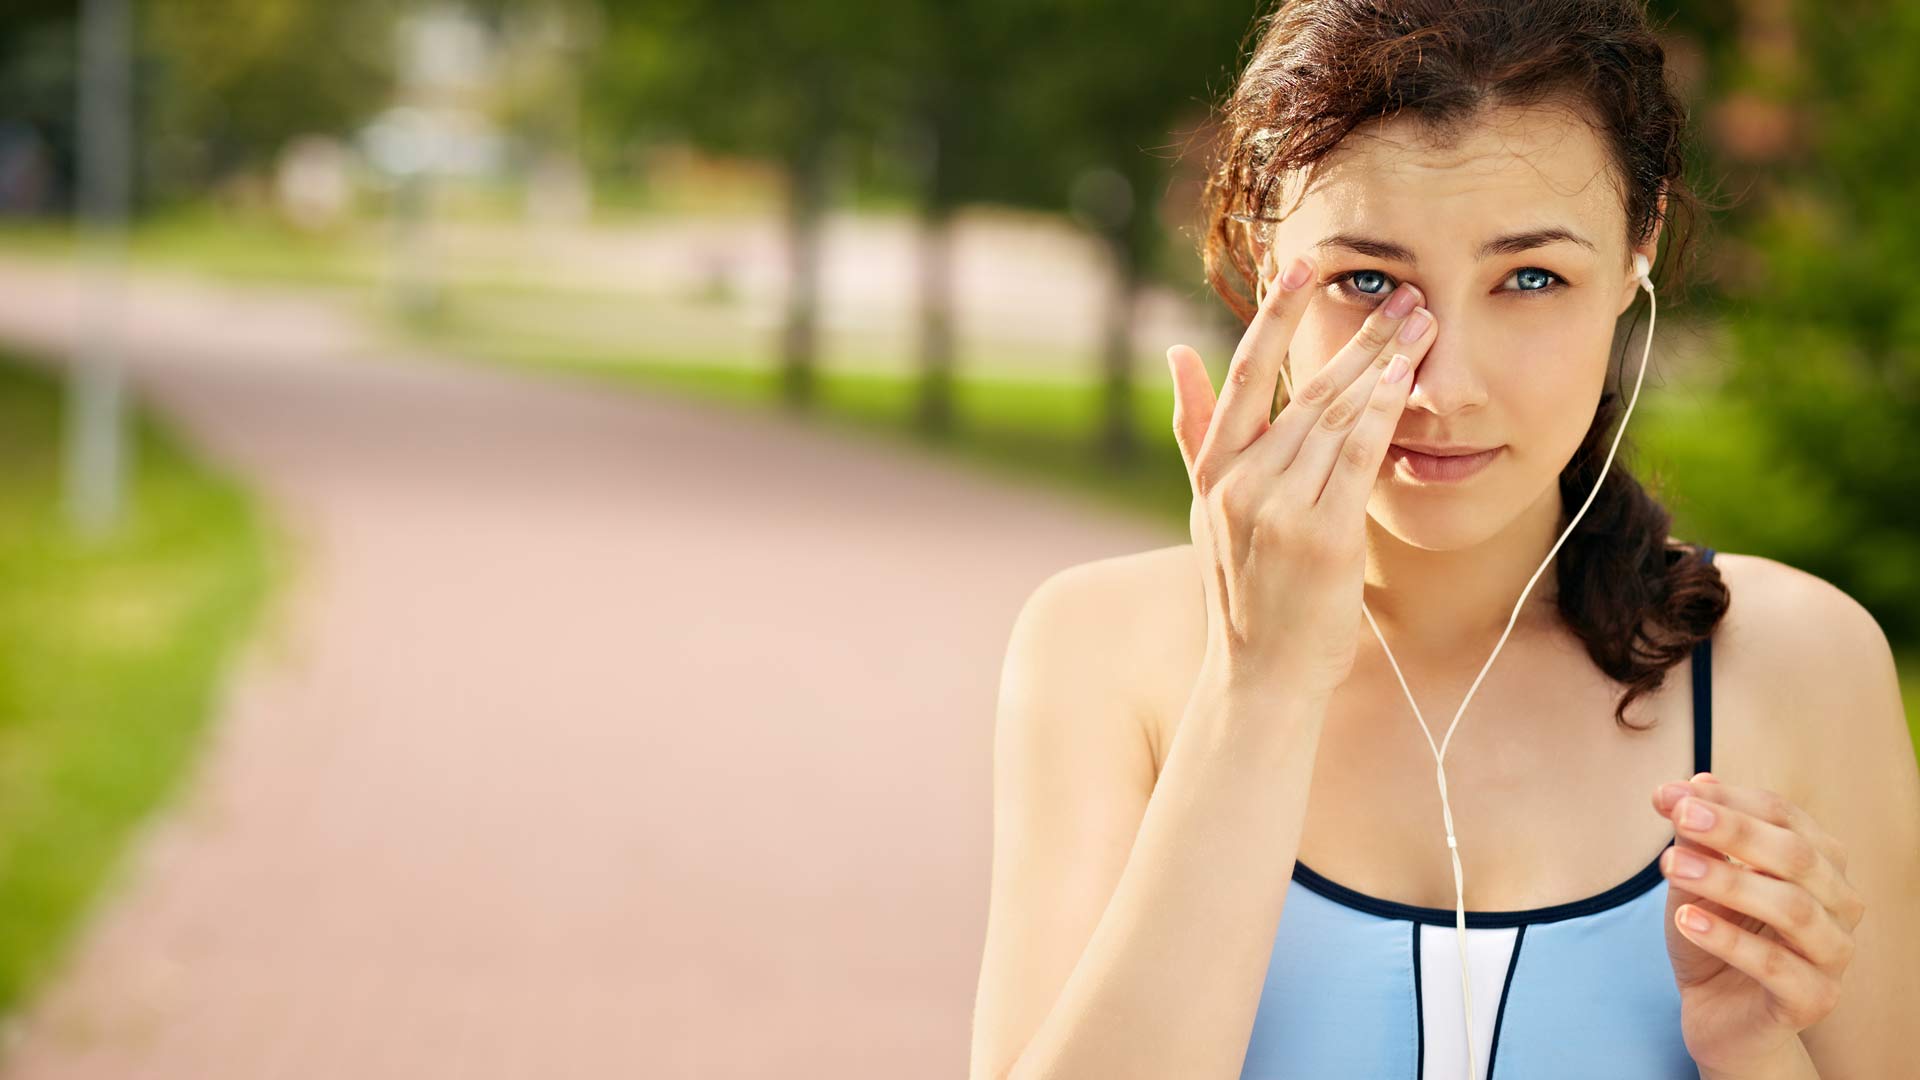 A woman touching her eye while exercising.